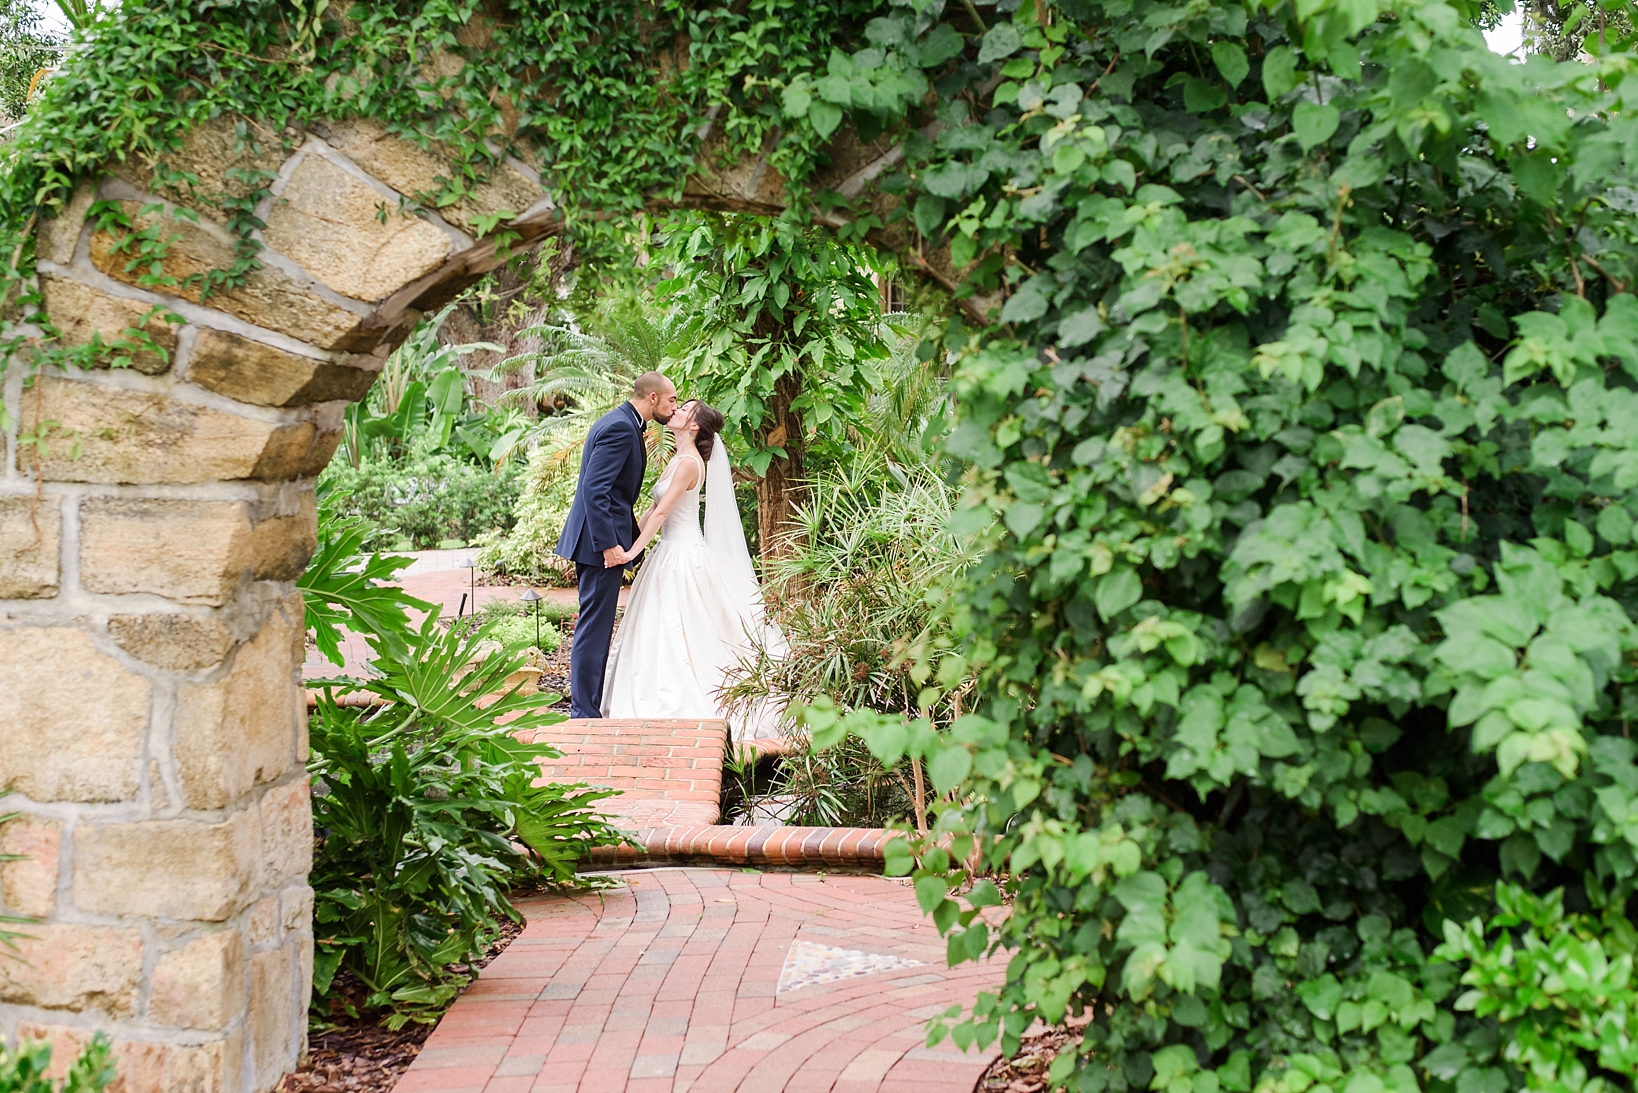 Bride and Groom kiss under the archway in the koi gardens by Sarah & Ben Photography